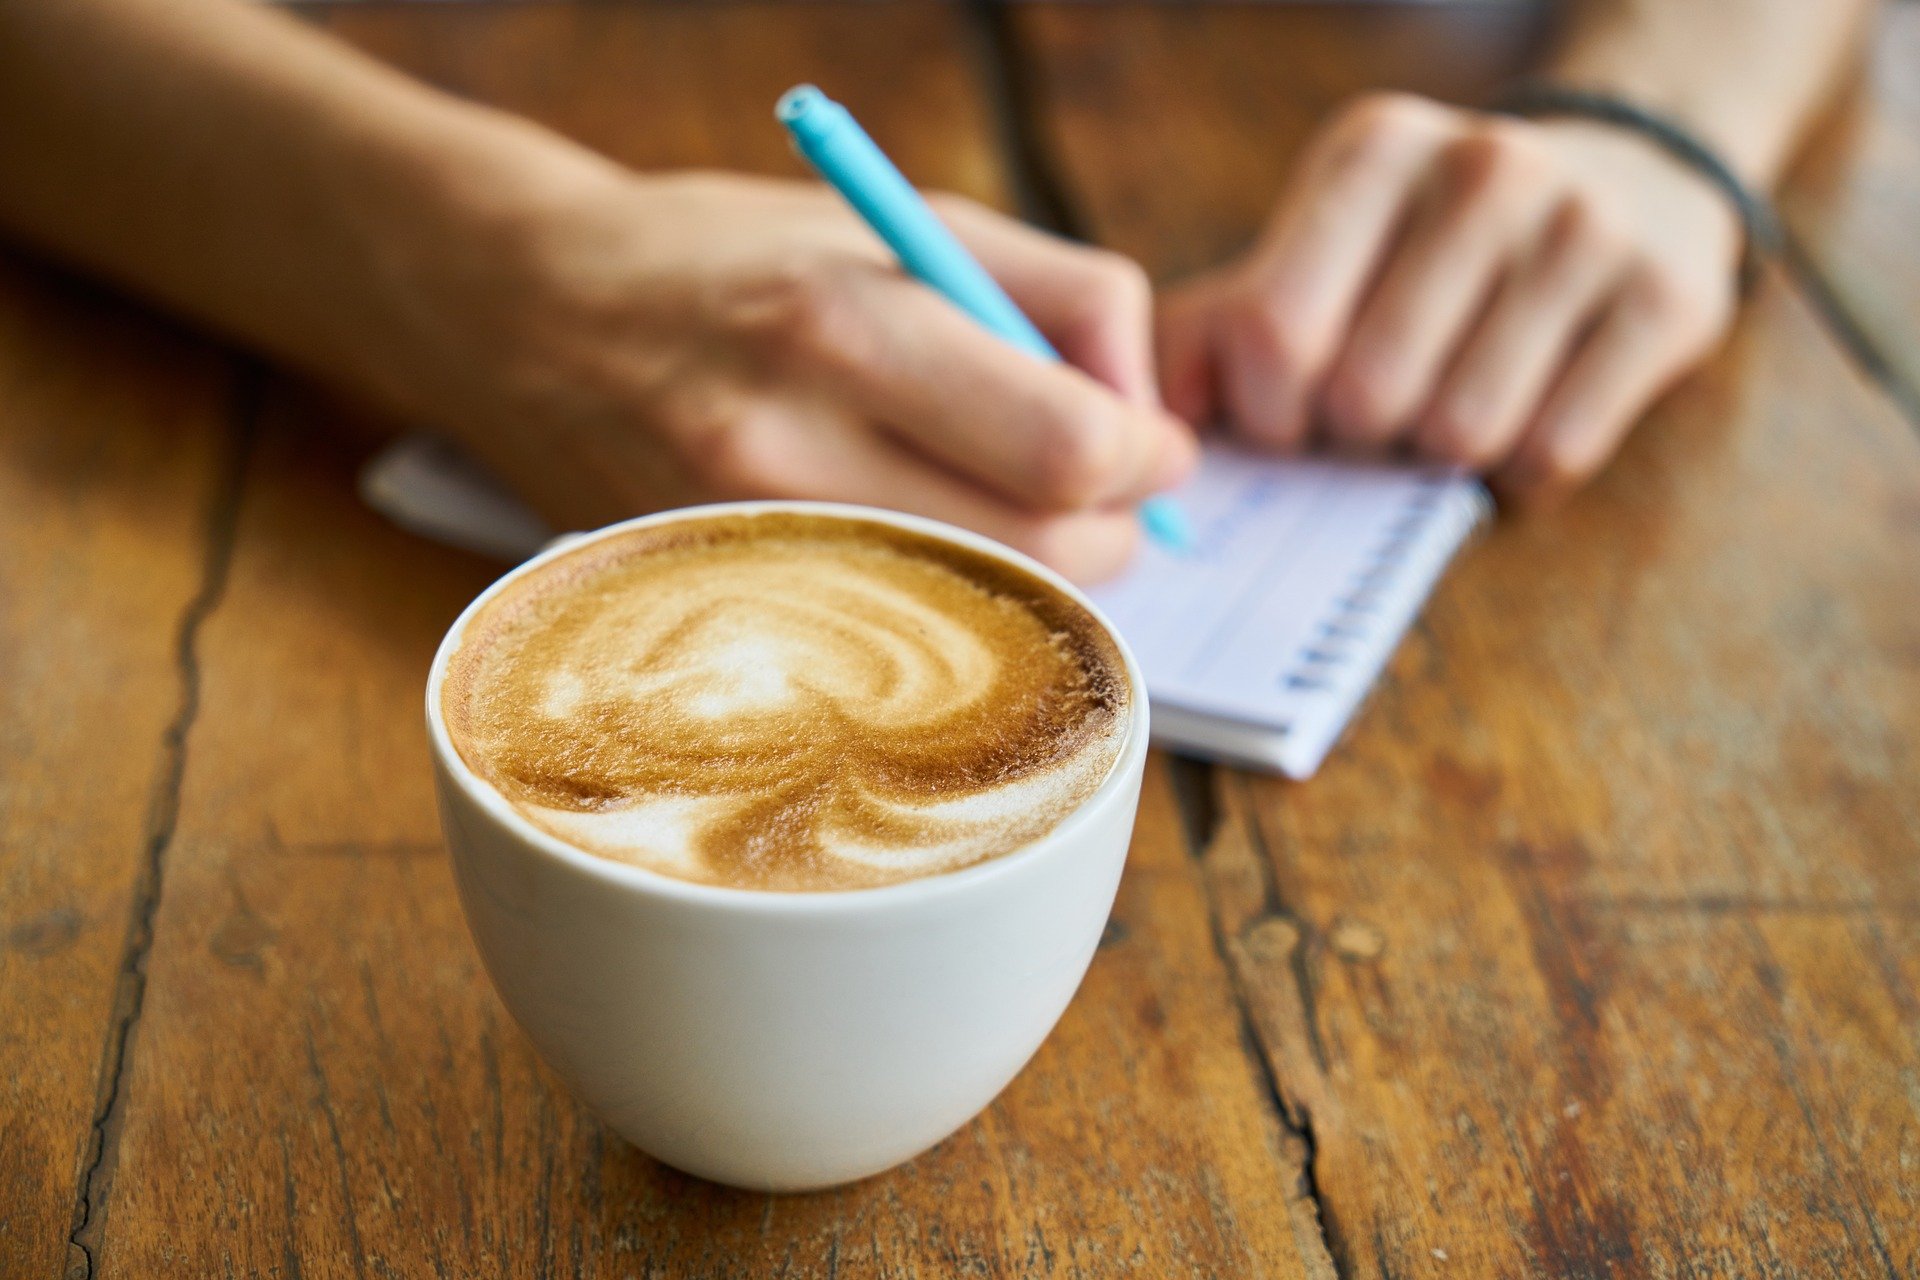 Close up of a cup of frothy coffee on a wooden table. Behind the cup, a pair of hands writes notes on a notepad with a blue pen.